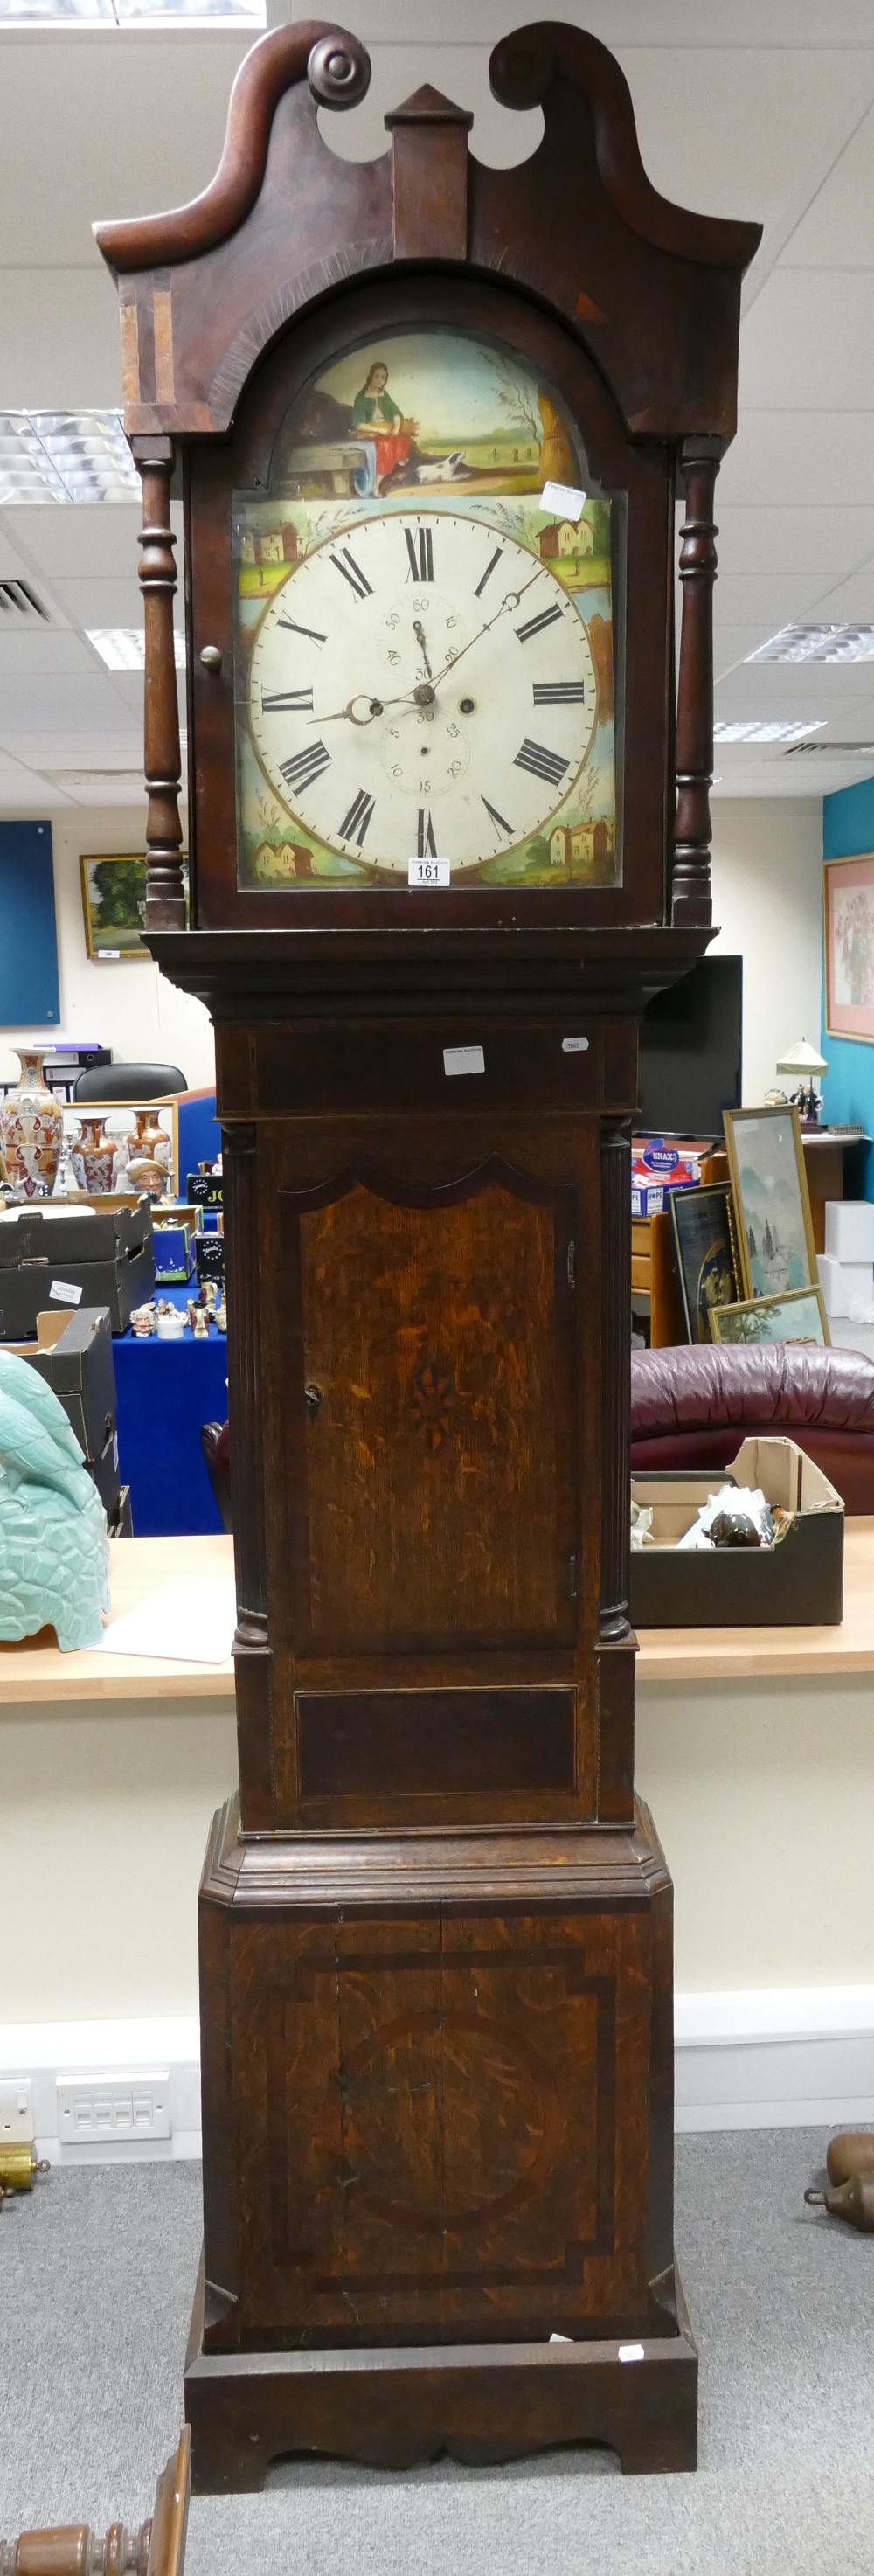 19th Century oak and mahogany inlaid Grandfather clock with painted arched dial